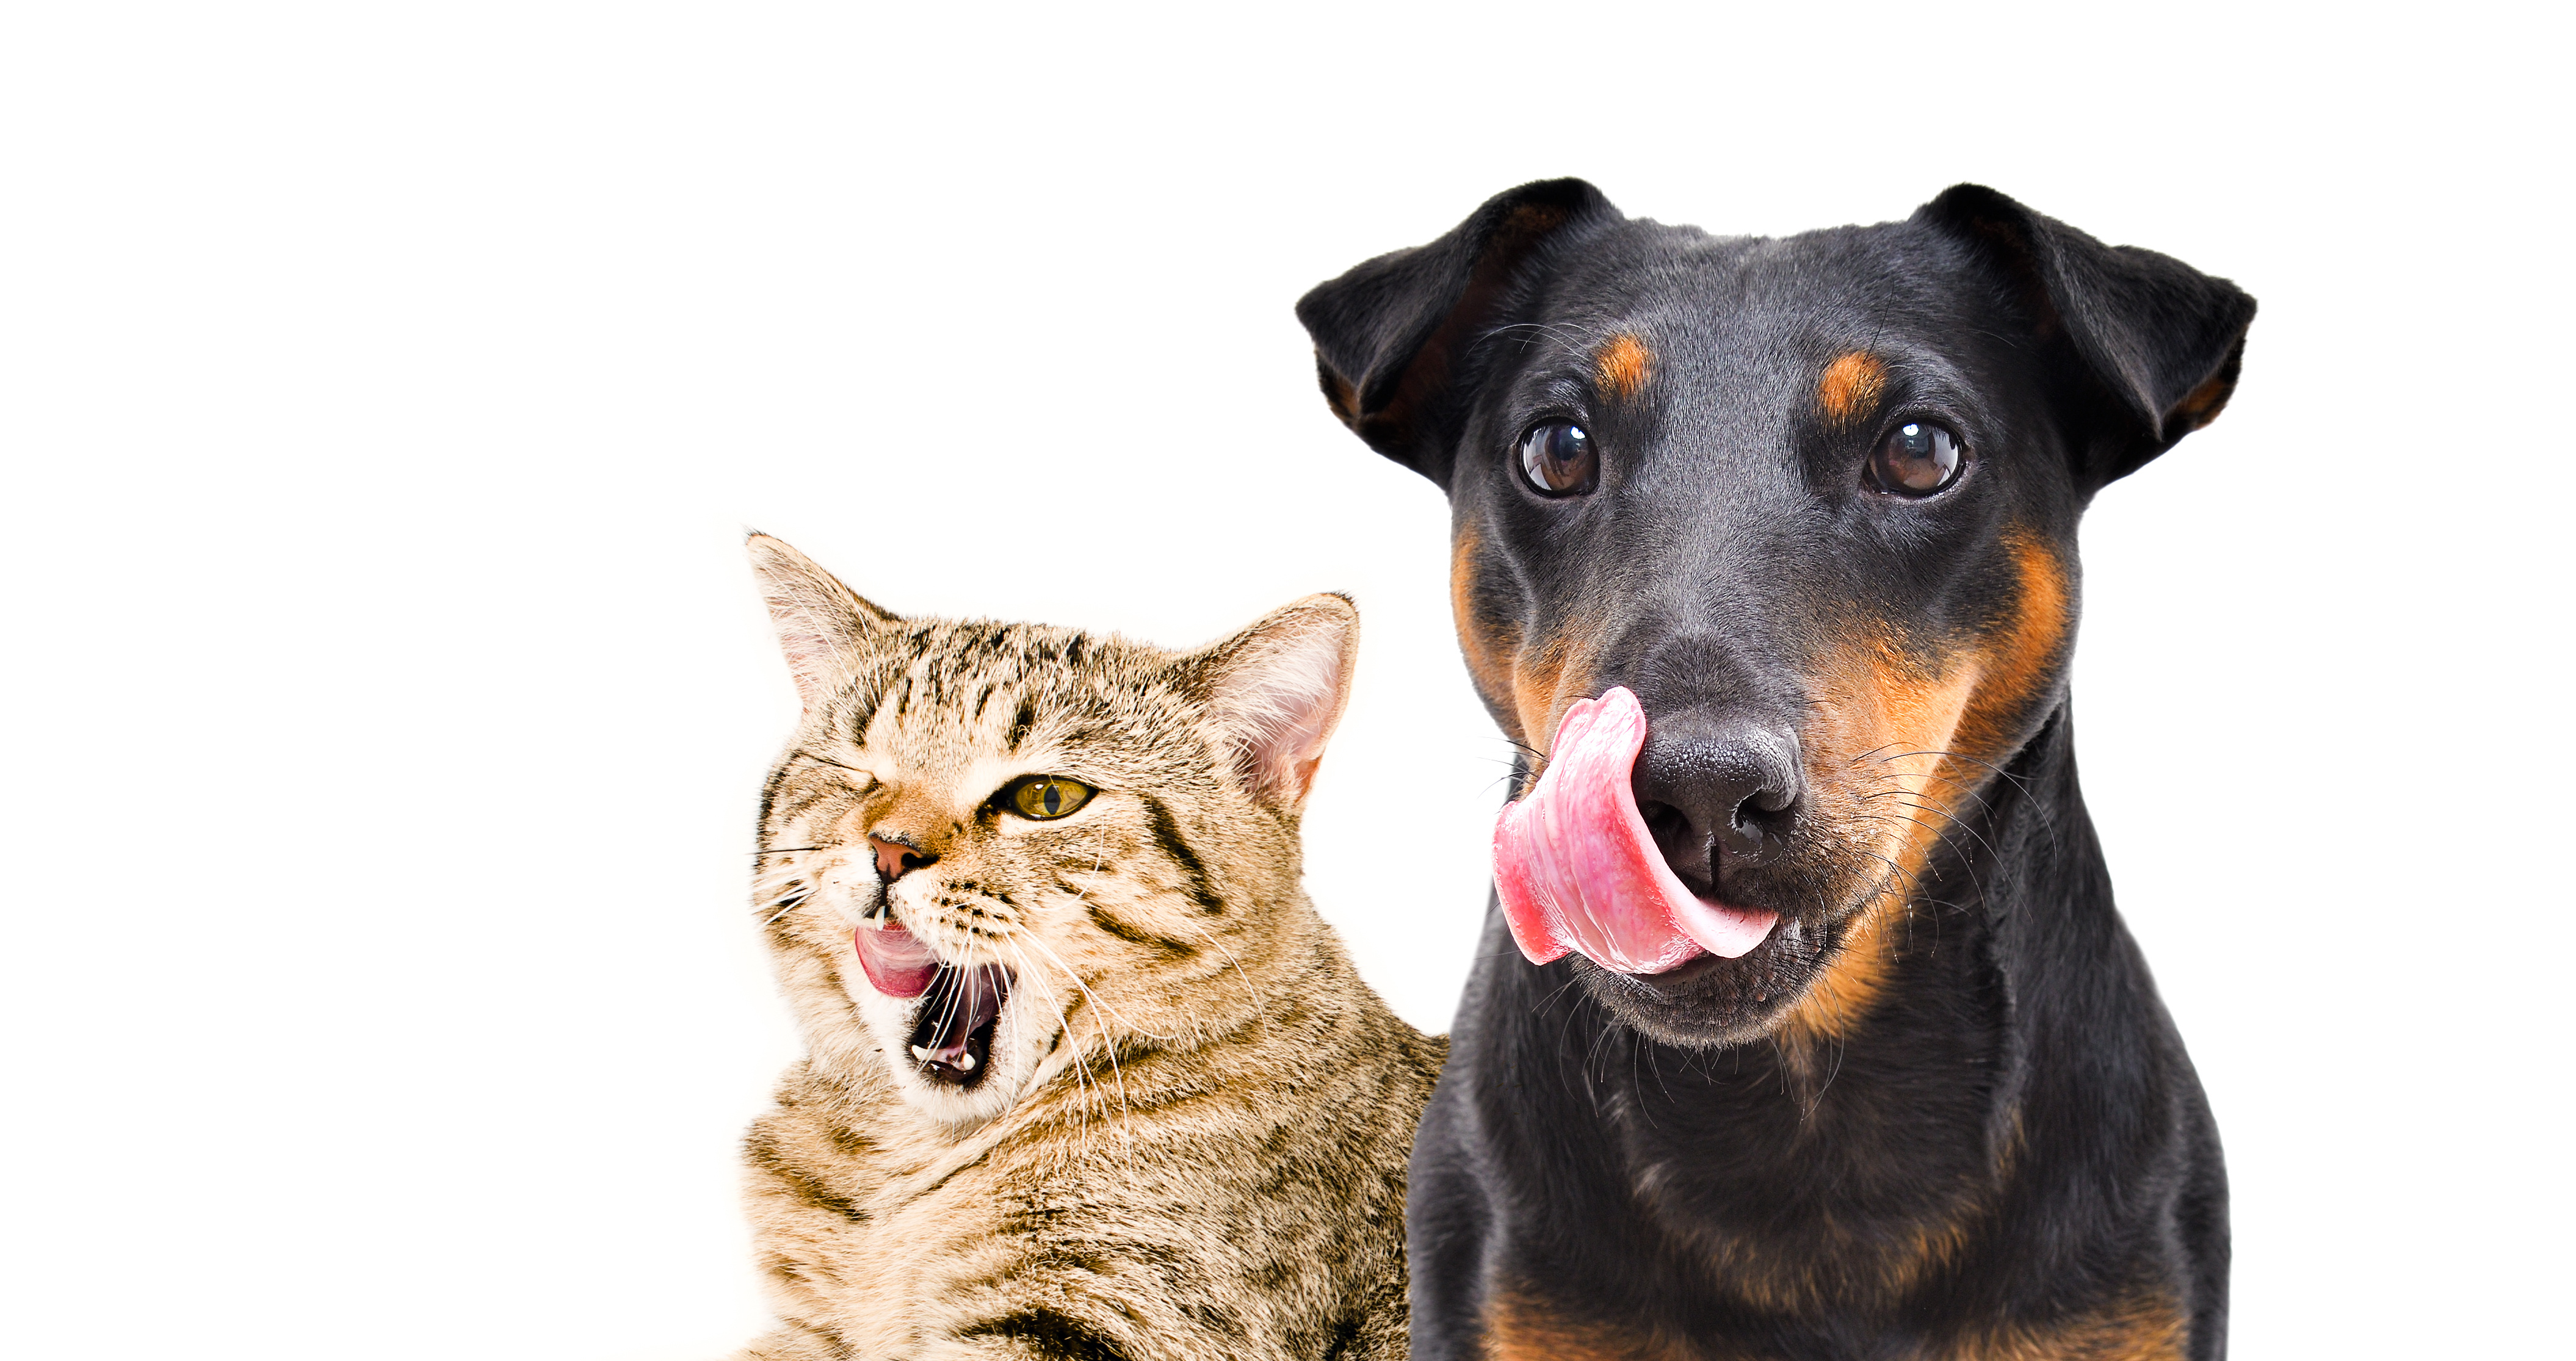 A dog and a cat lick their mouths.